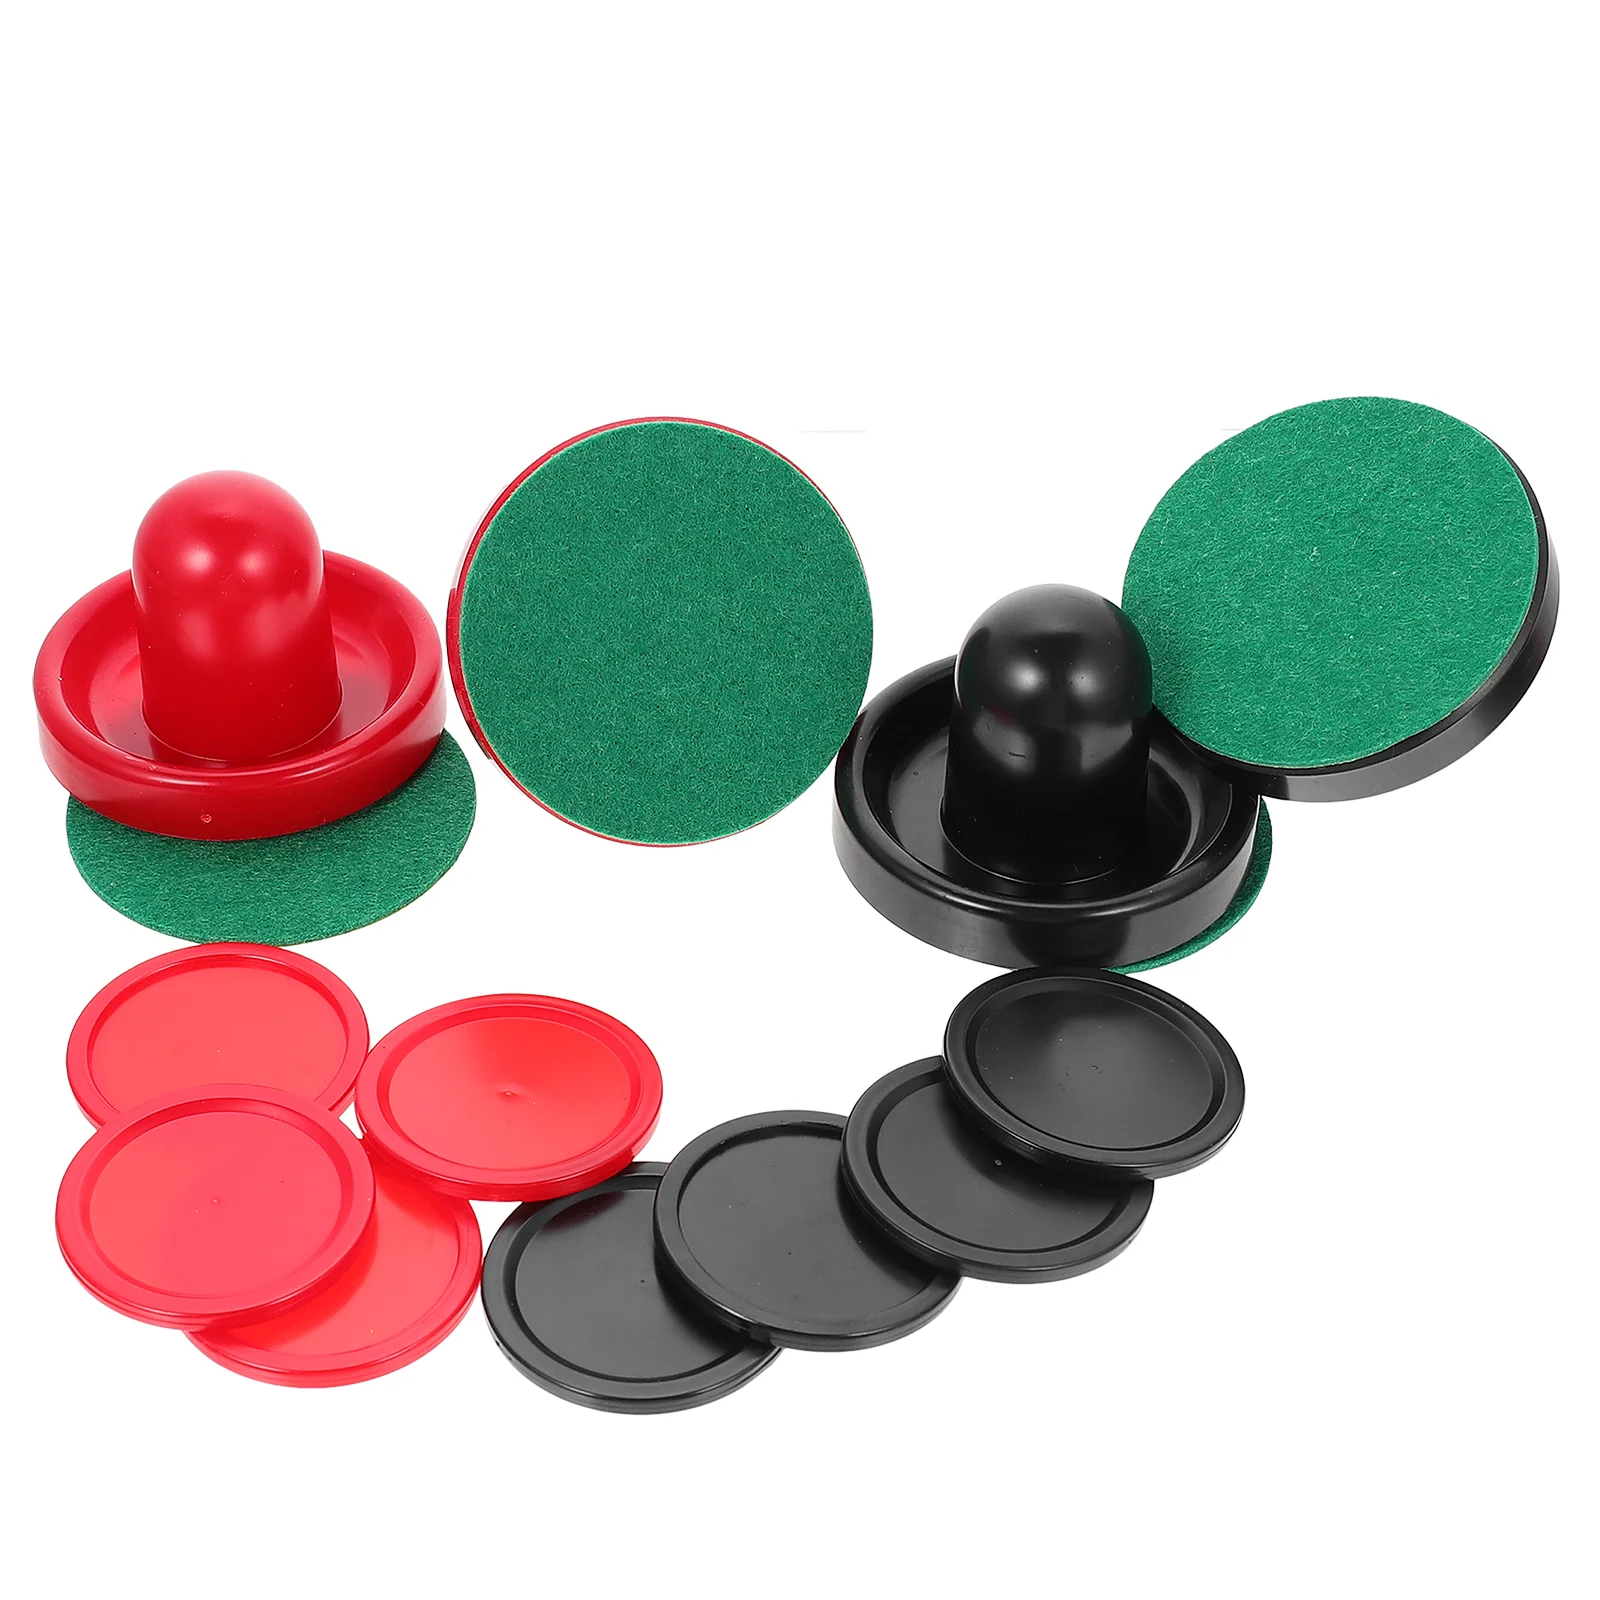 Ball Header Set Air Hockey Pucks Paddle Pushers Accessory Game Accessories Parts